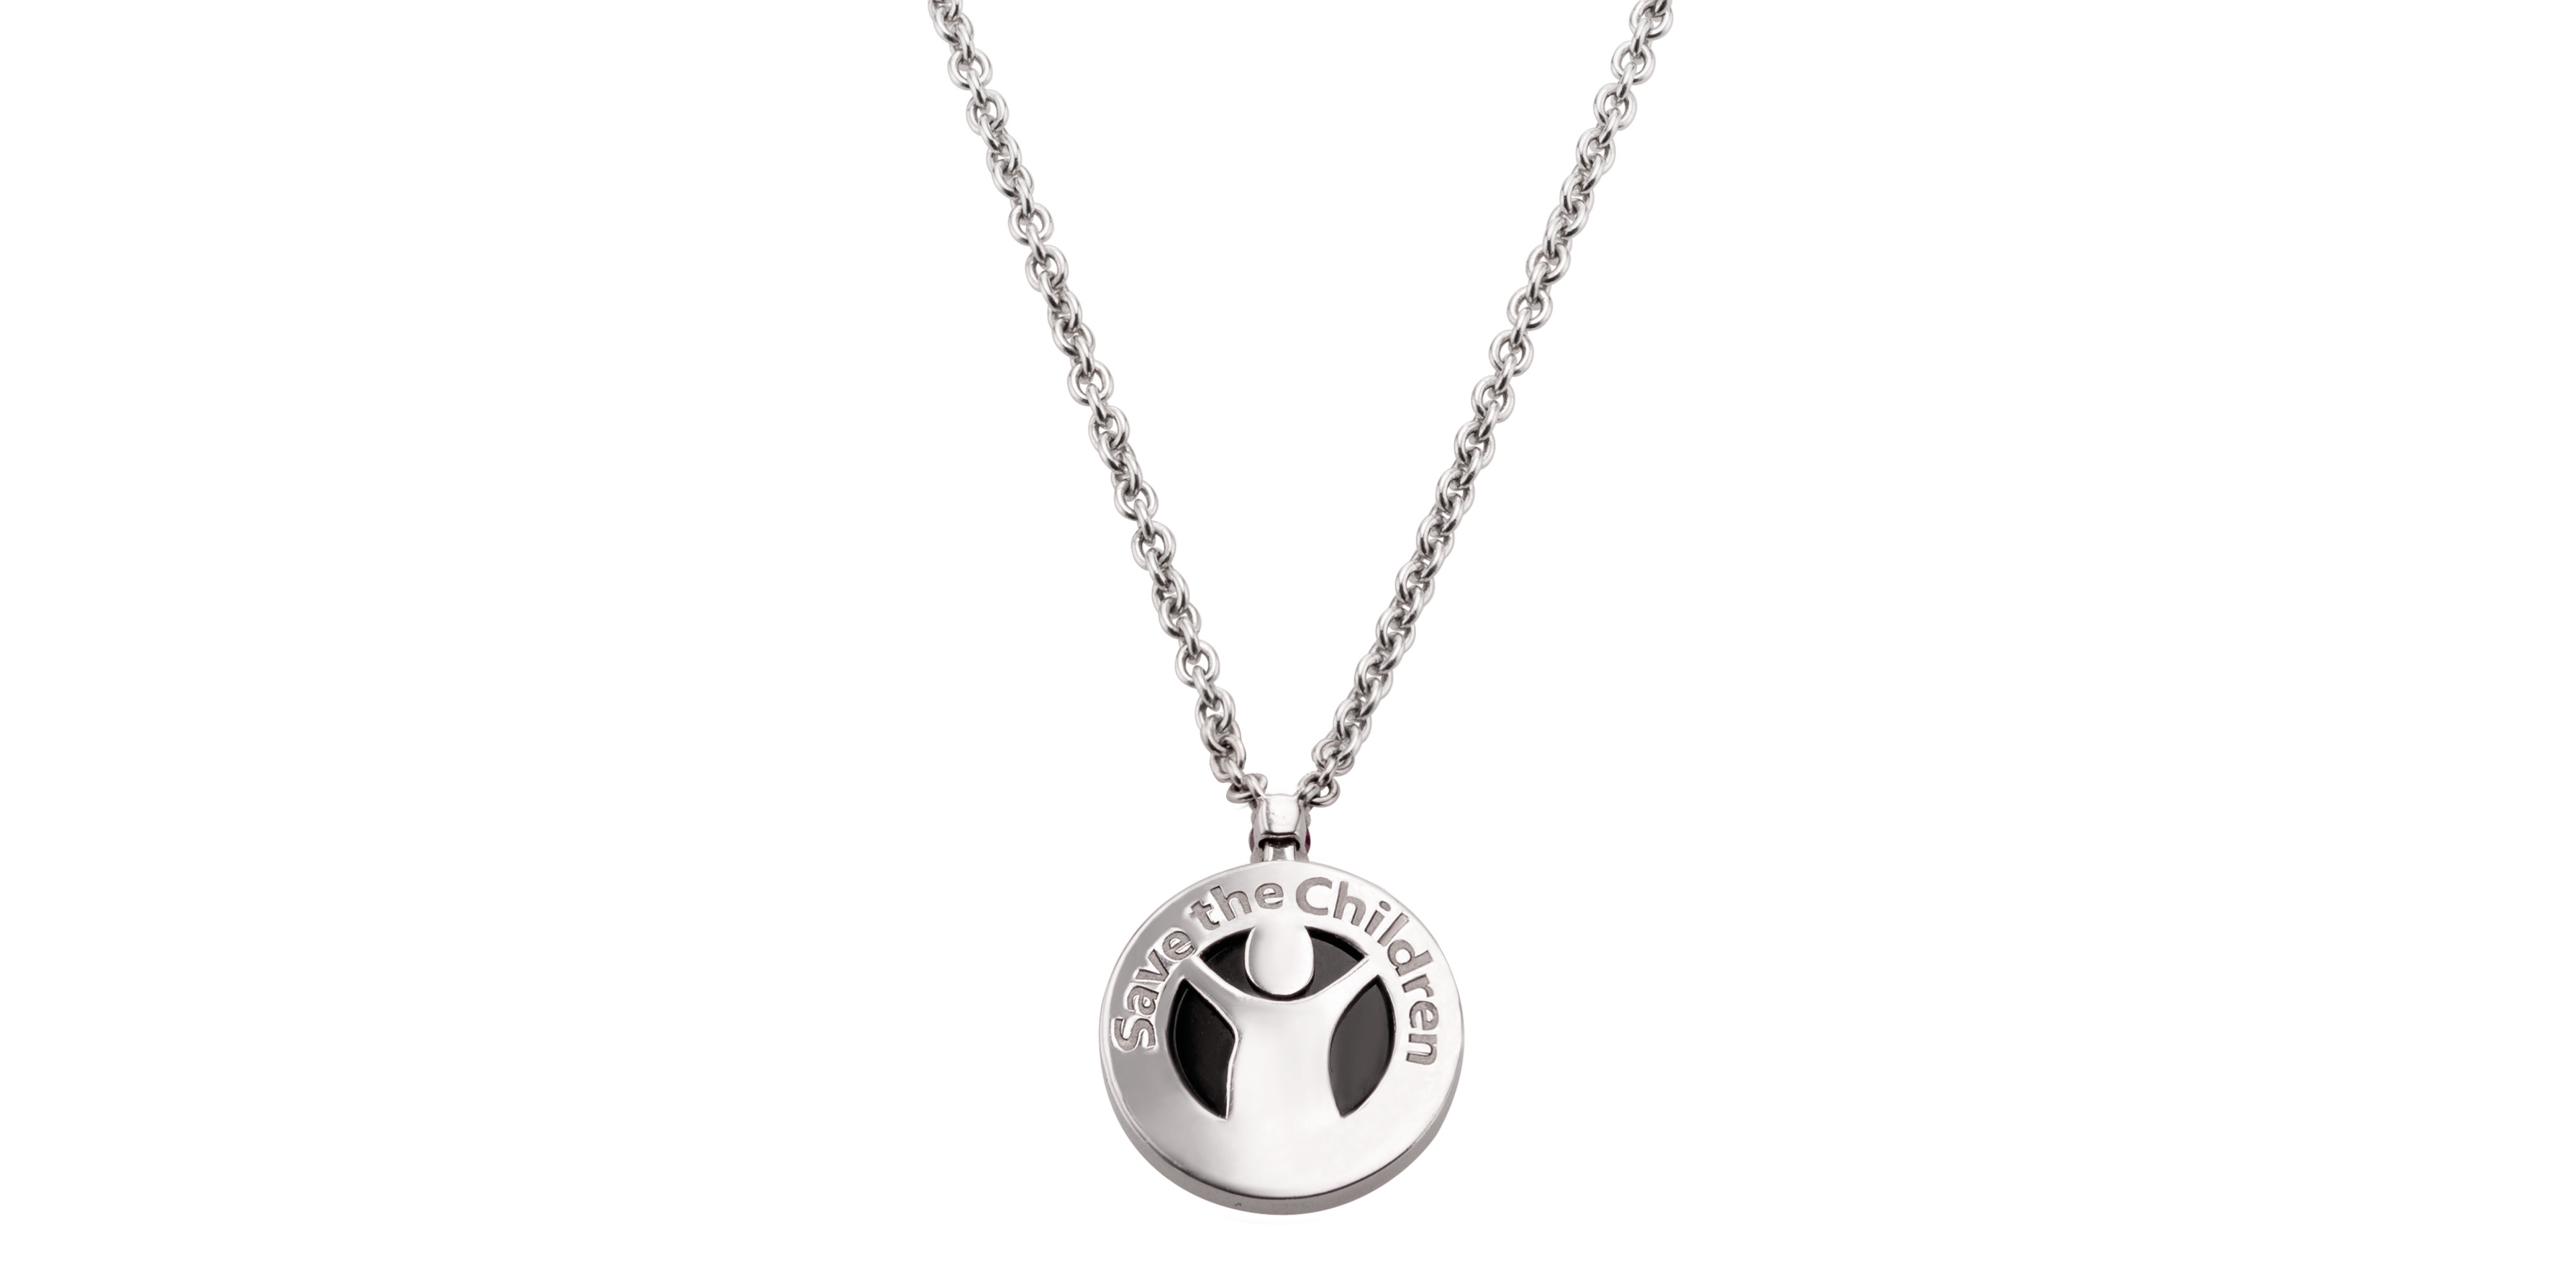 Since beginning its unique partnership in 2009 with Save the Children, Bvlgari has raised over $85 million globally through sales of an iconic Save the Children jewelry collection. This is a necklace with the Save the Children logo. Photo credit: Save the Children 2019.